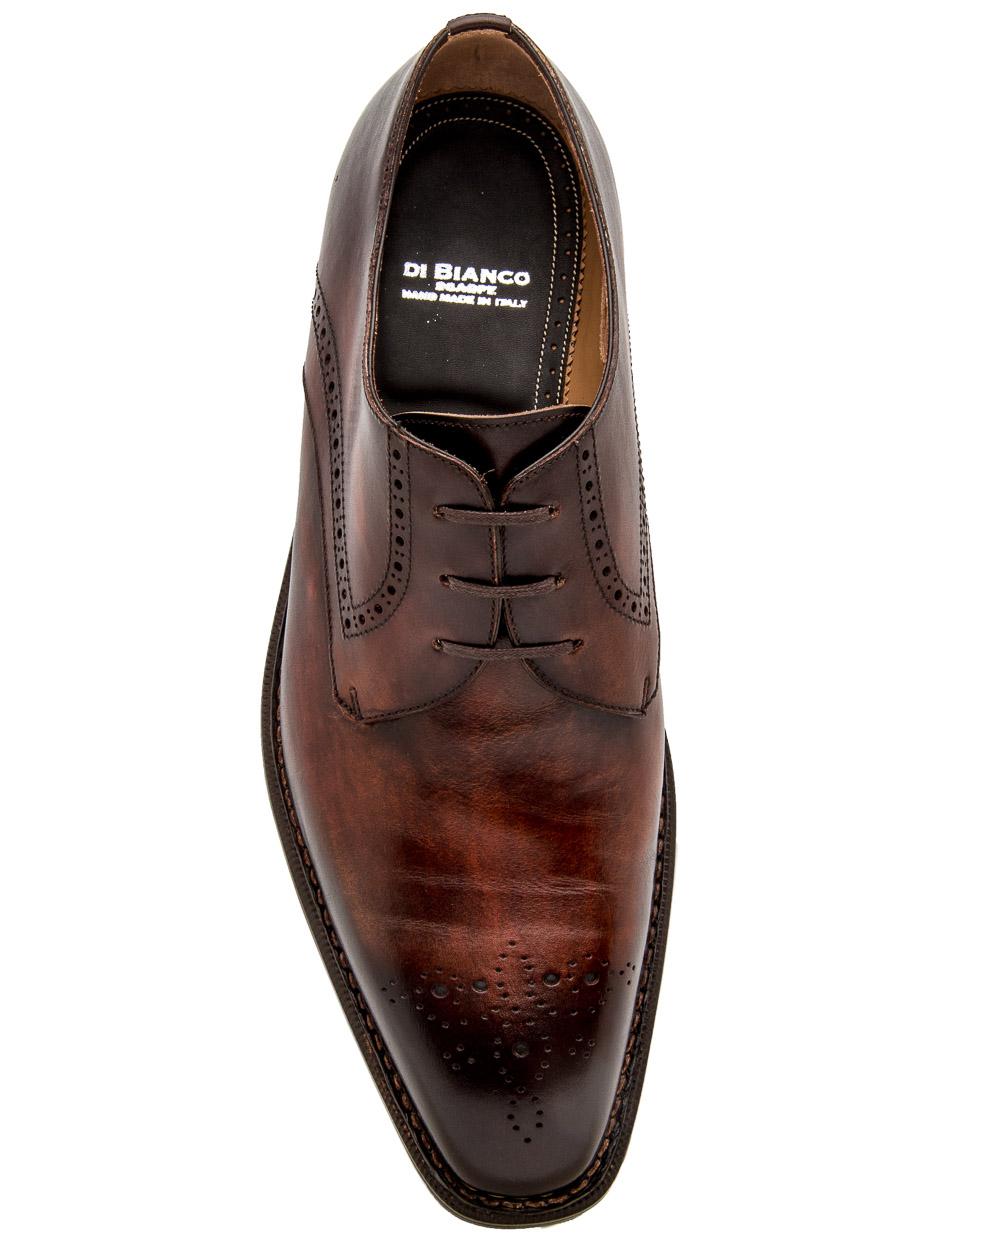 Bianco Melograno Leather Derby in for Men - Lyst